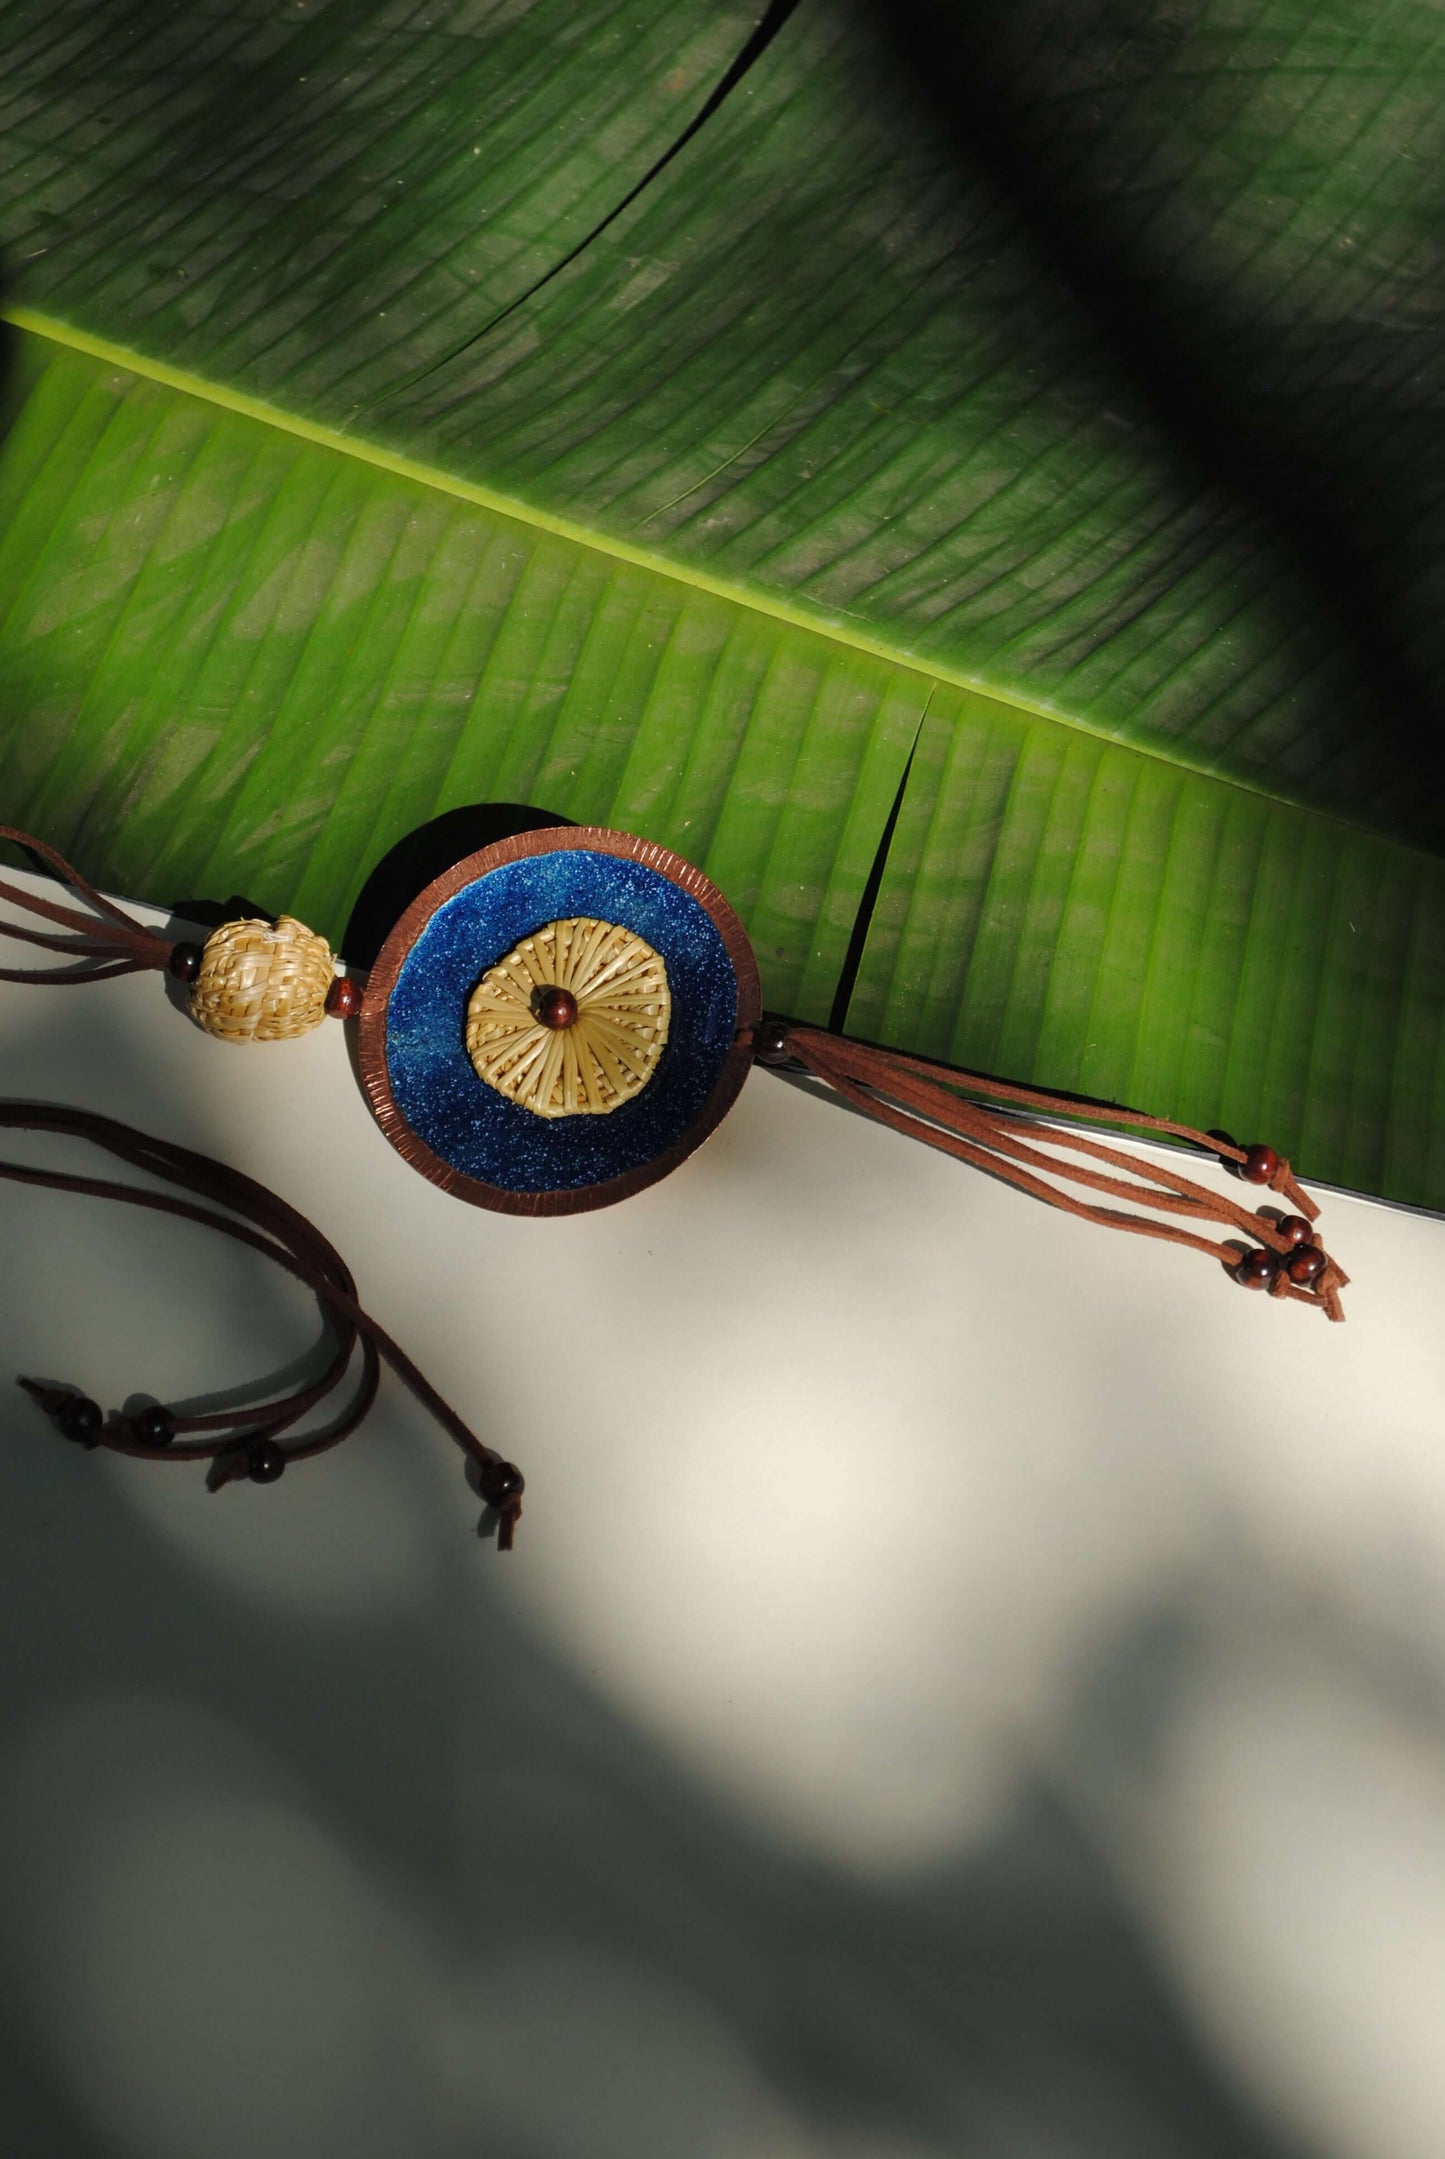 Truna natural fibre golden grass and copper enamel handcrafted jewelry from Odisha, Vaati blue pendant